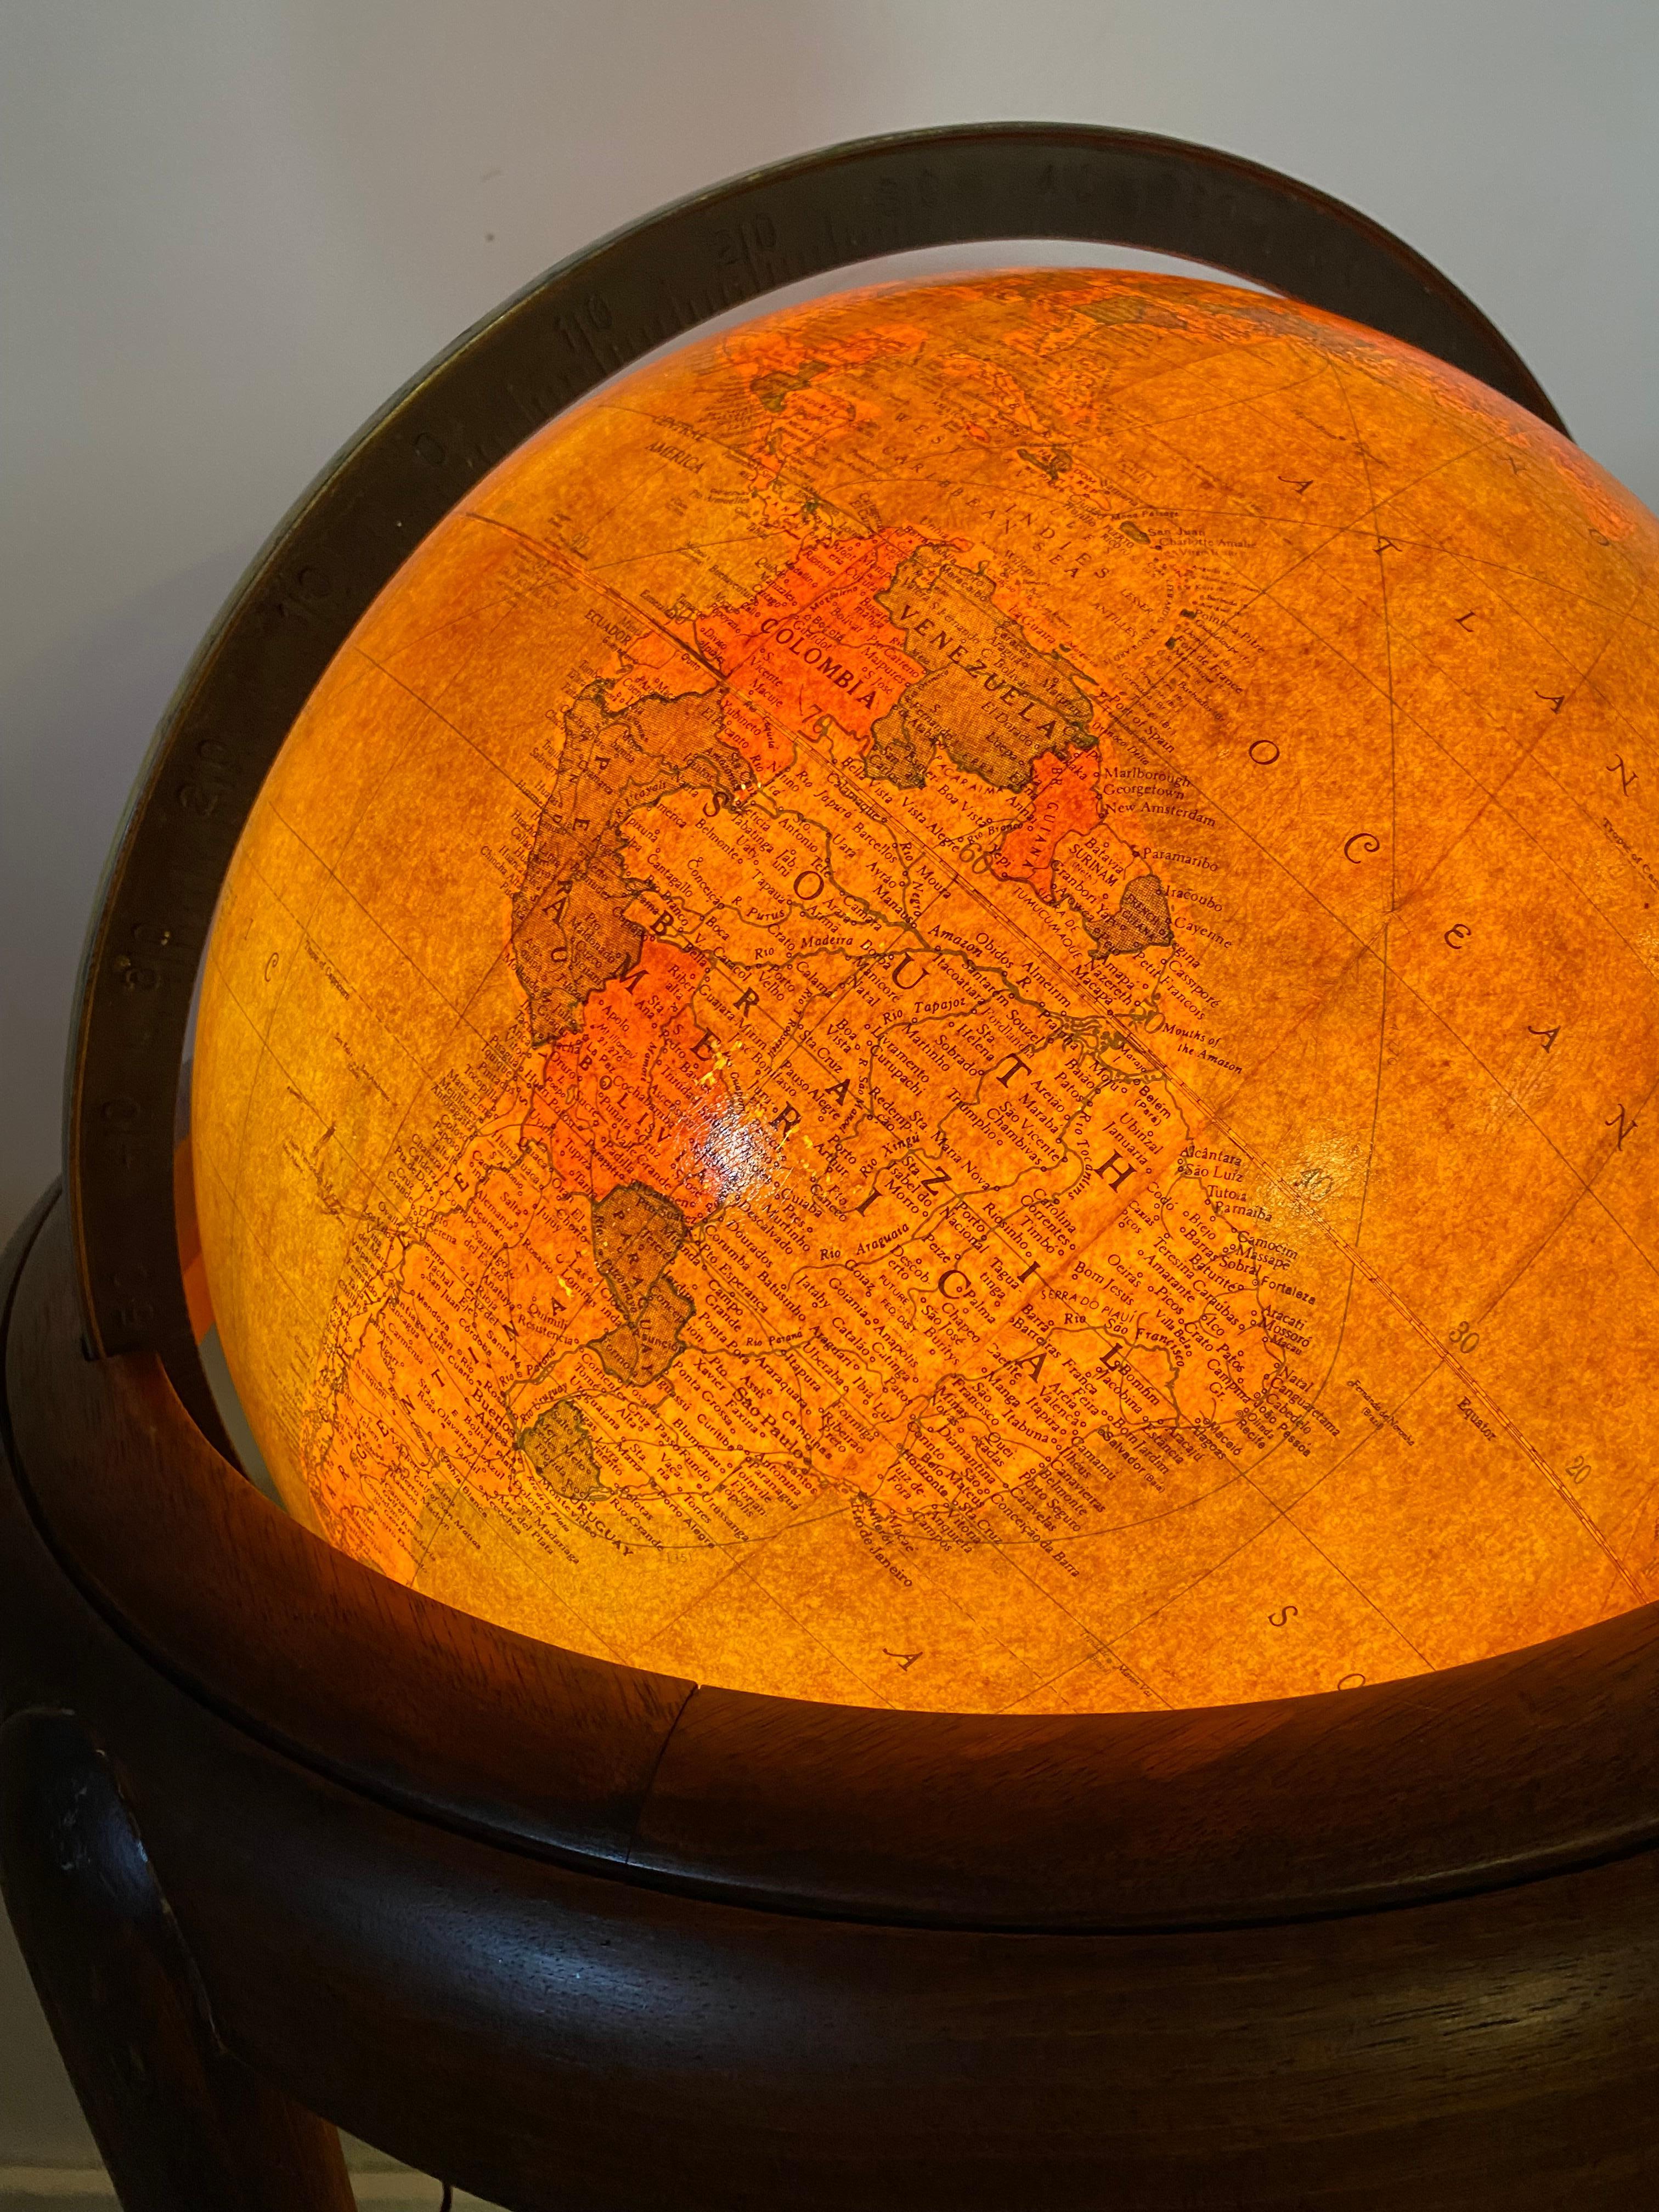 Mid-20th Century American Art Deco Globe of the World with an Internal Light, Glass and Walnut